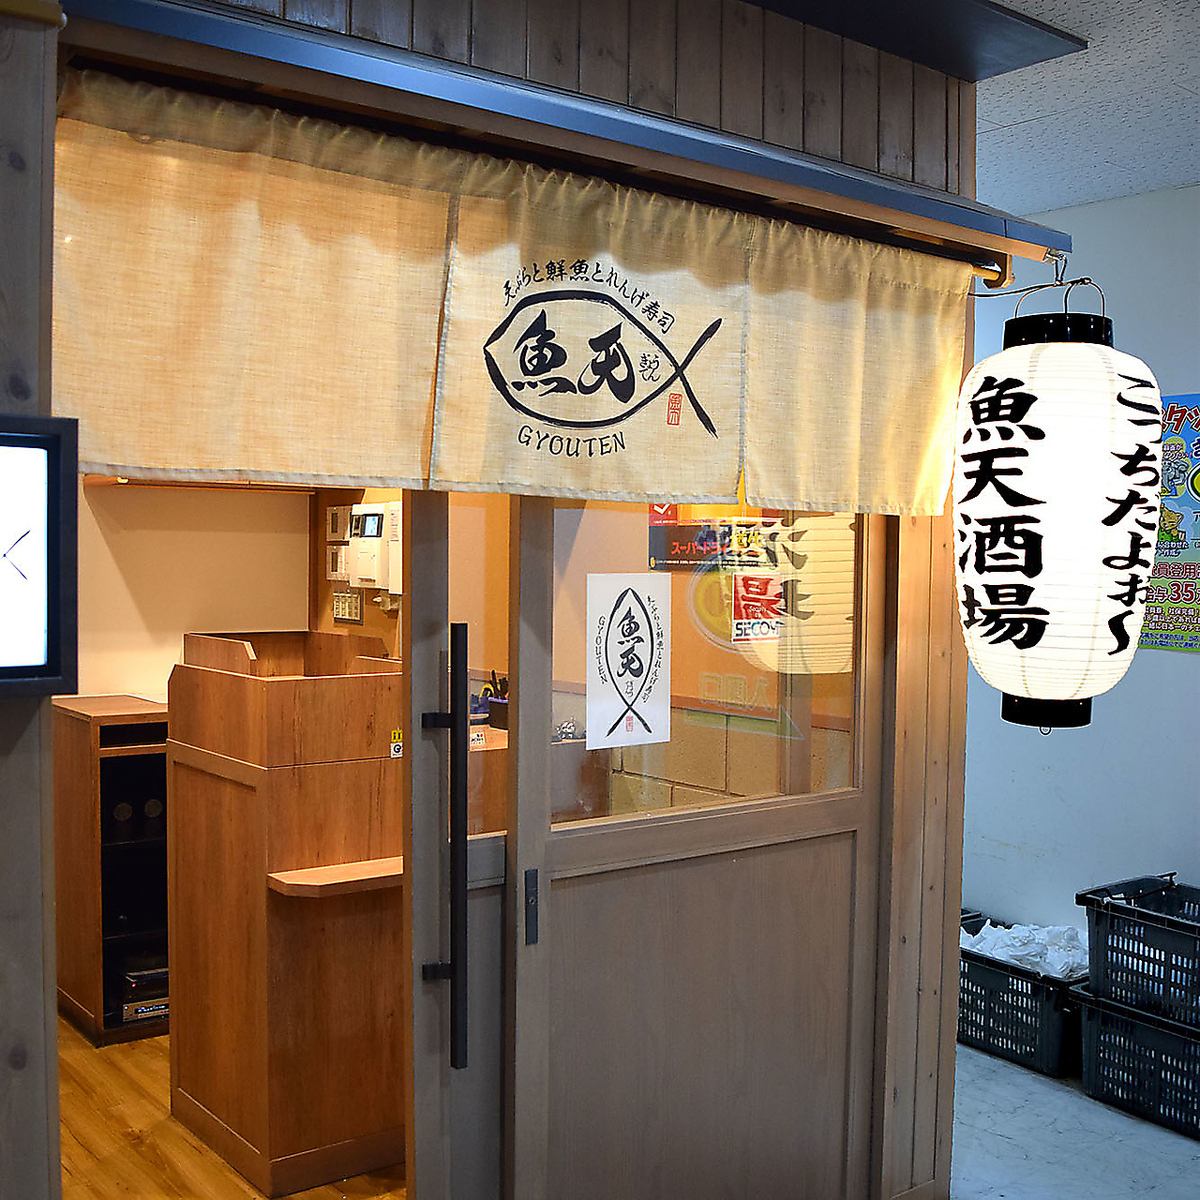 Enjoy fish dishes, tempura and sushi in a private room